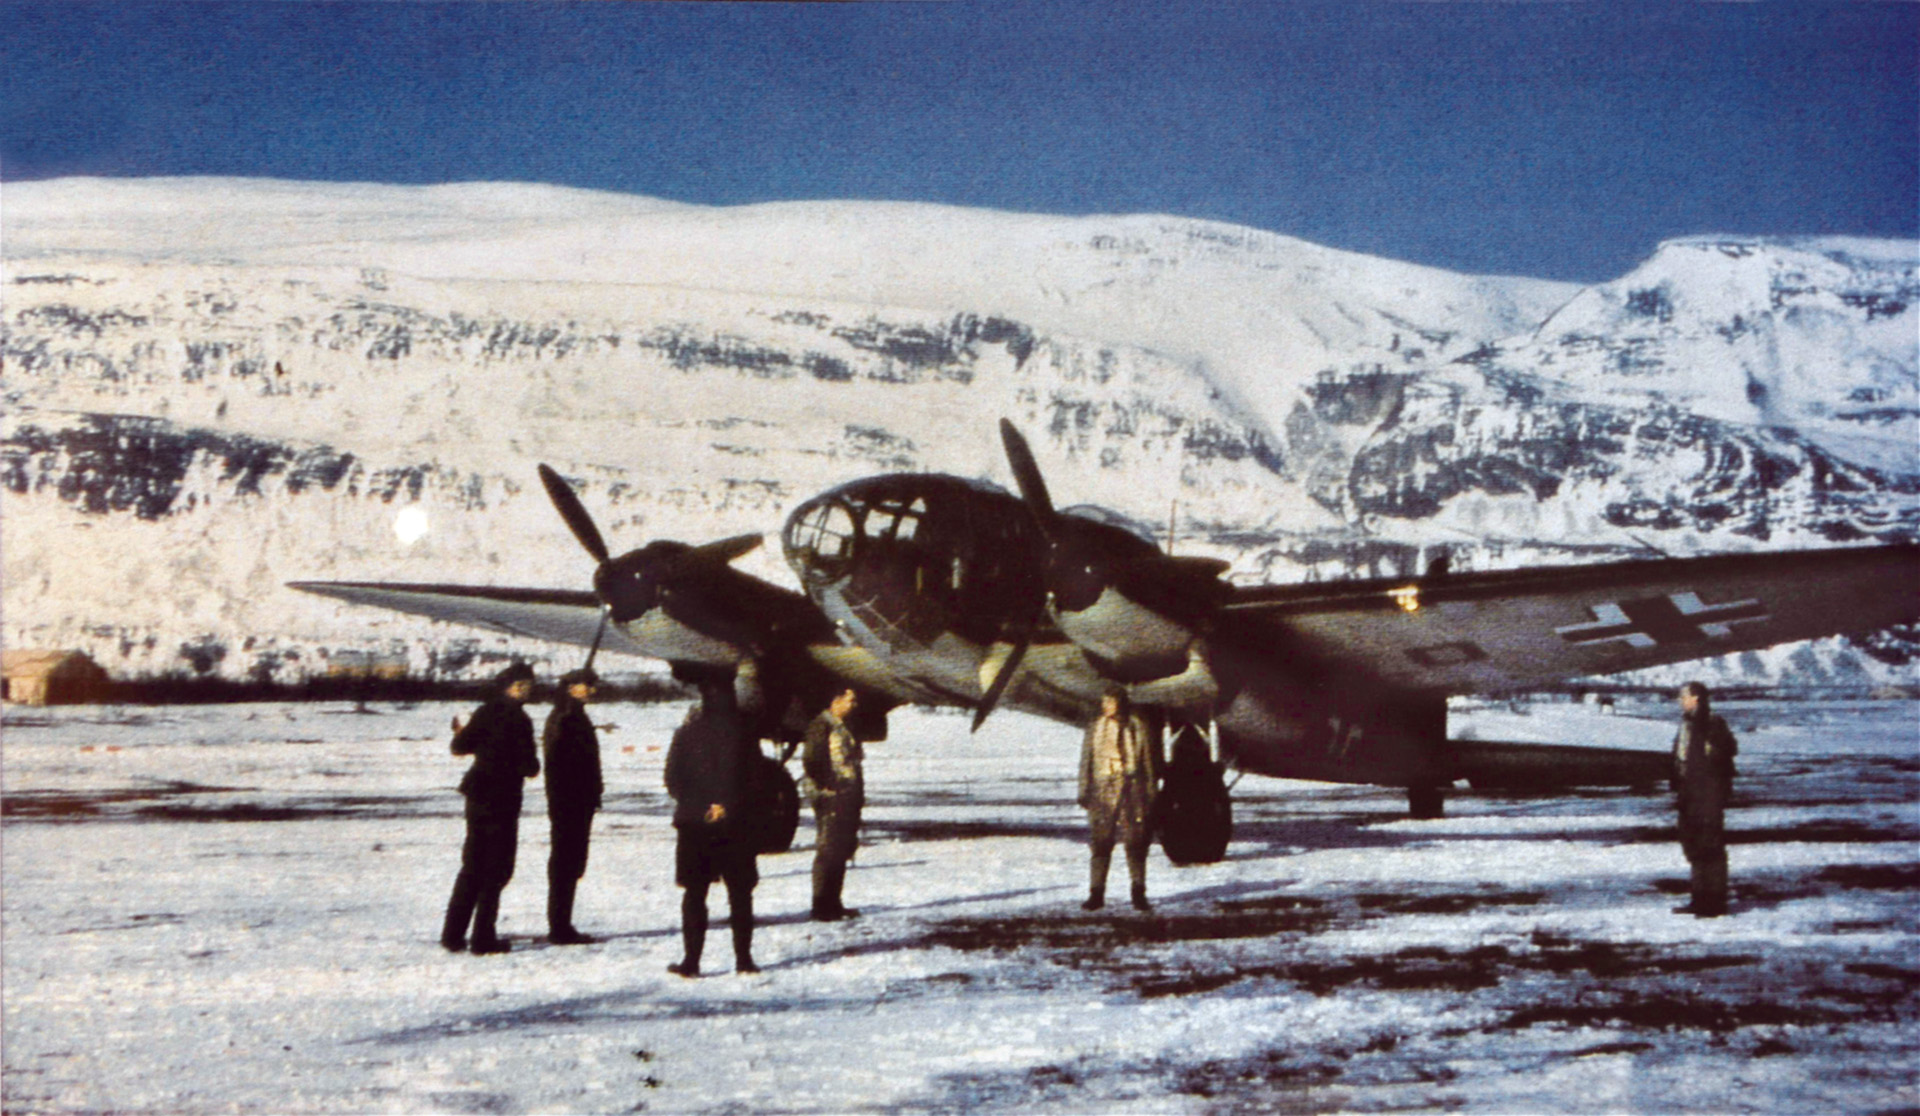 First Lieutenant Rudolf Schutze of Wekusta 5 and his flight crew gather near a Heinkel He-111weather aircraft on the ice of Advent, Fjord.